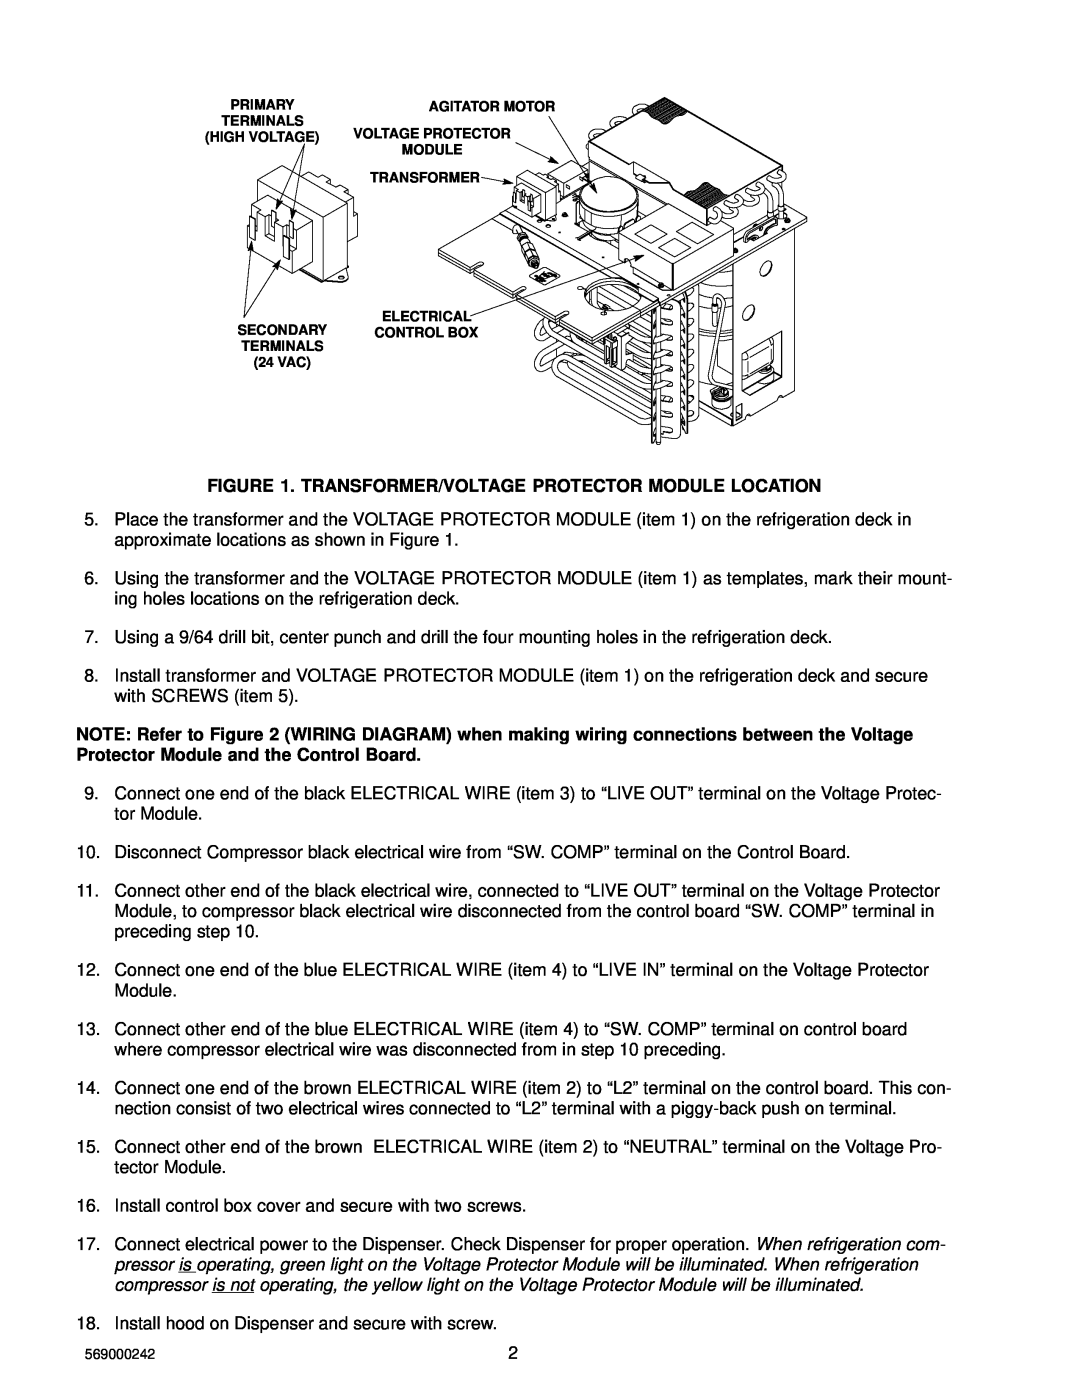 Cornelius 230 VAC, 50Hz installation instructions Install hood on Dispenser and secure with screw 